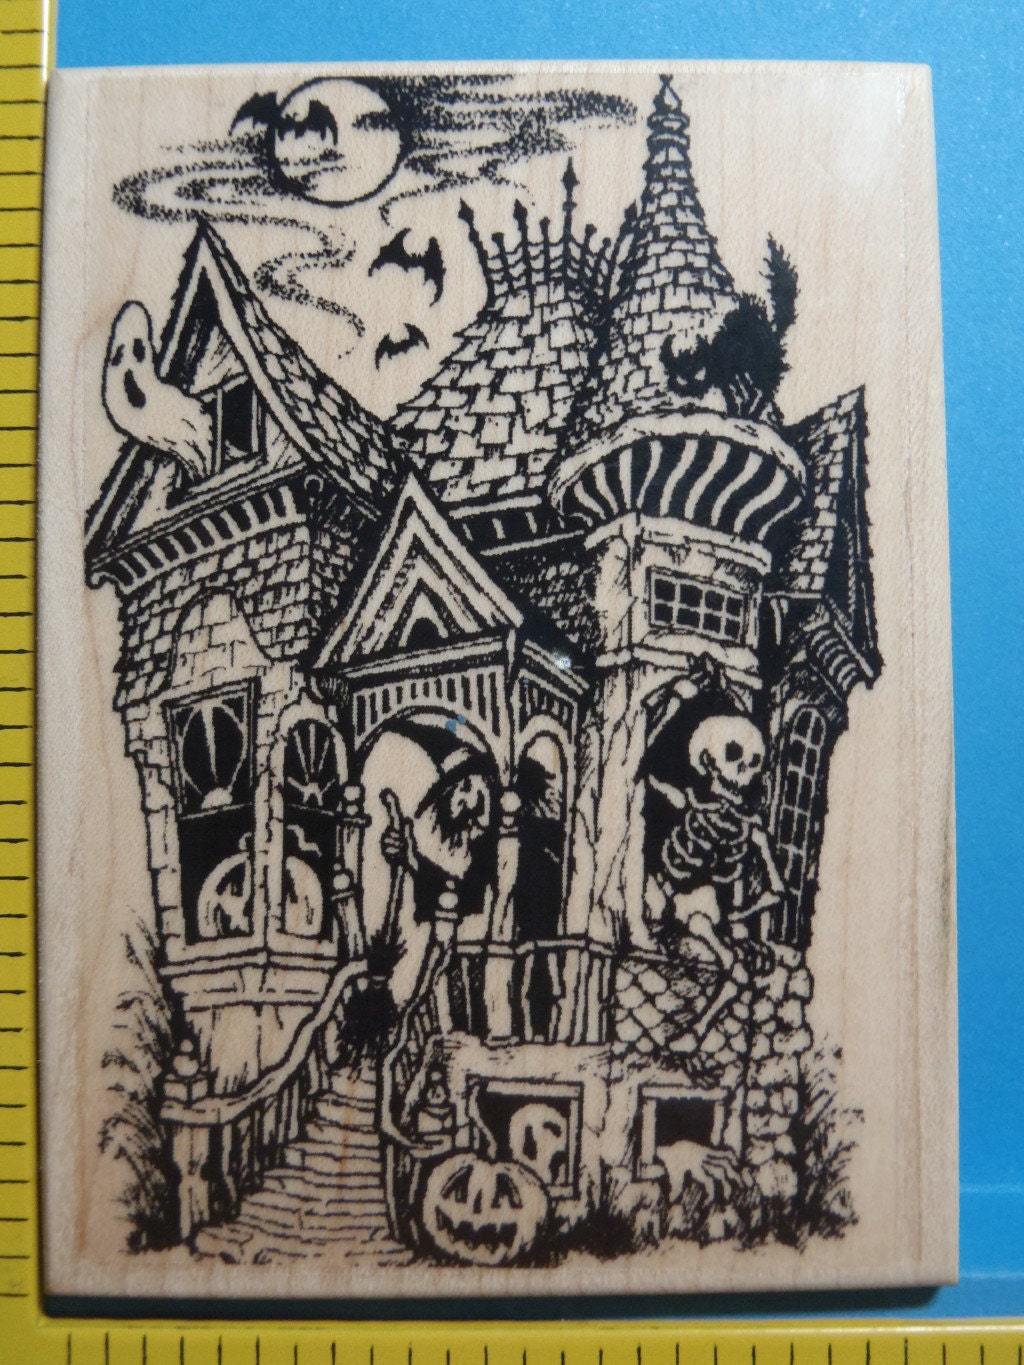 Haunted House Halloween New Mounted Rubber Stamp by Abracadabra Stamp Makers - $30.00